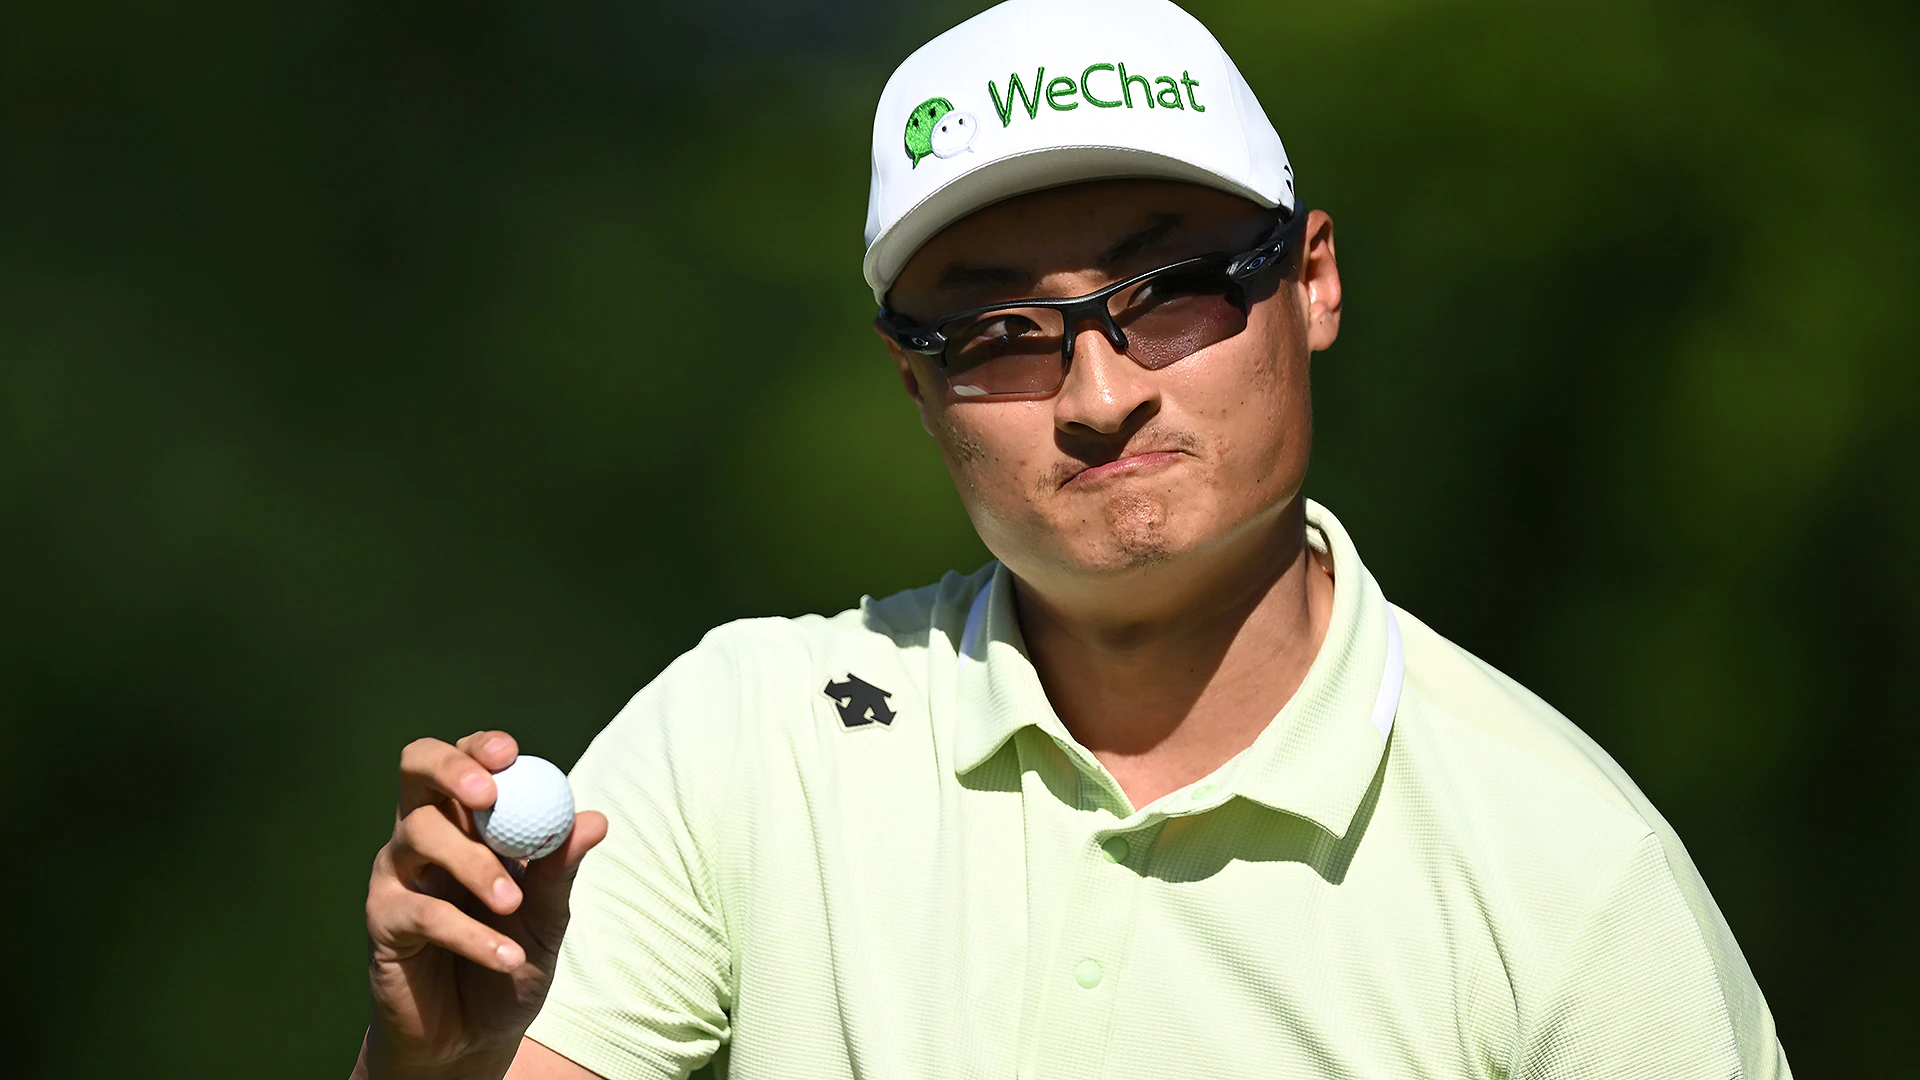 With two eagles in final four holes, Haotong Li shoots 62 to lead in Germany